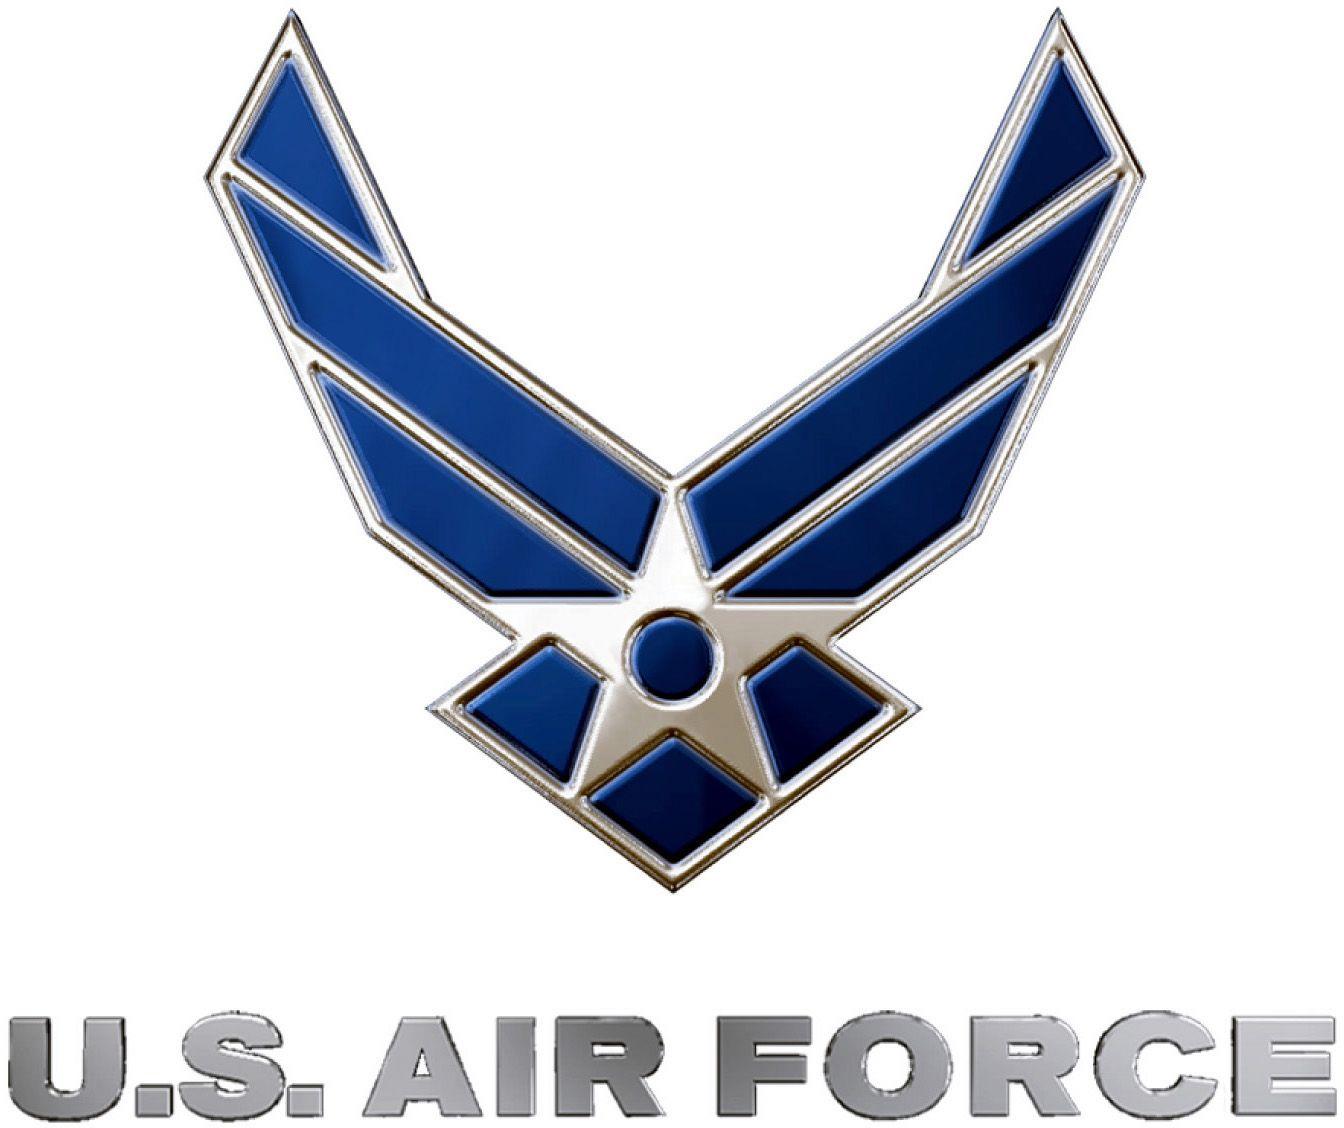 3D Air Force Logo - Air Force Logo – Silver and Blue 3D, with text